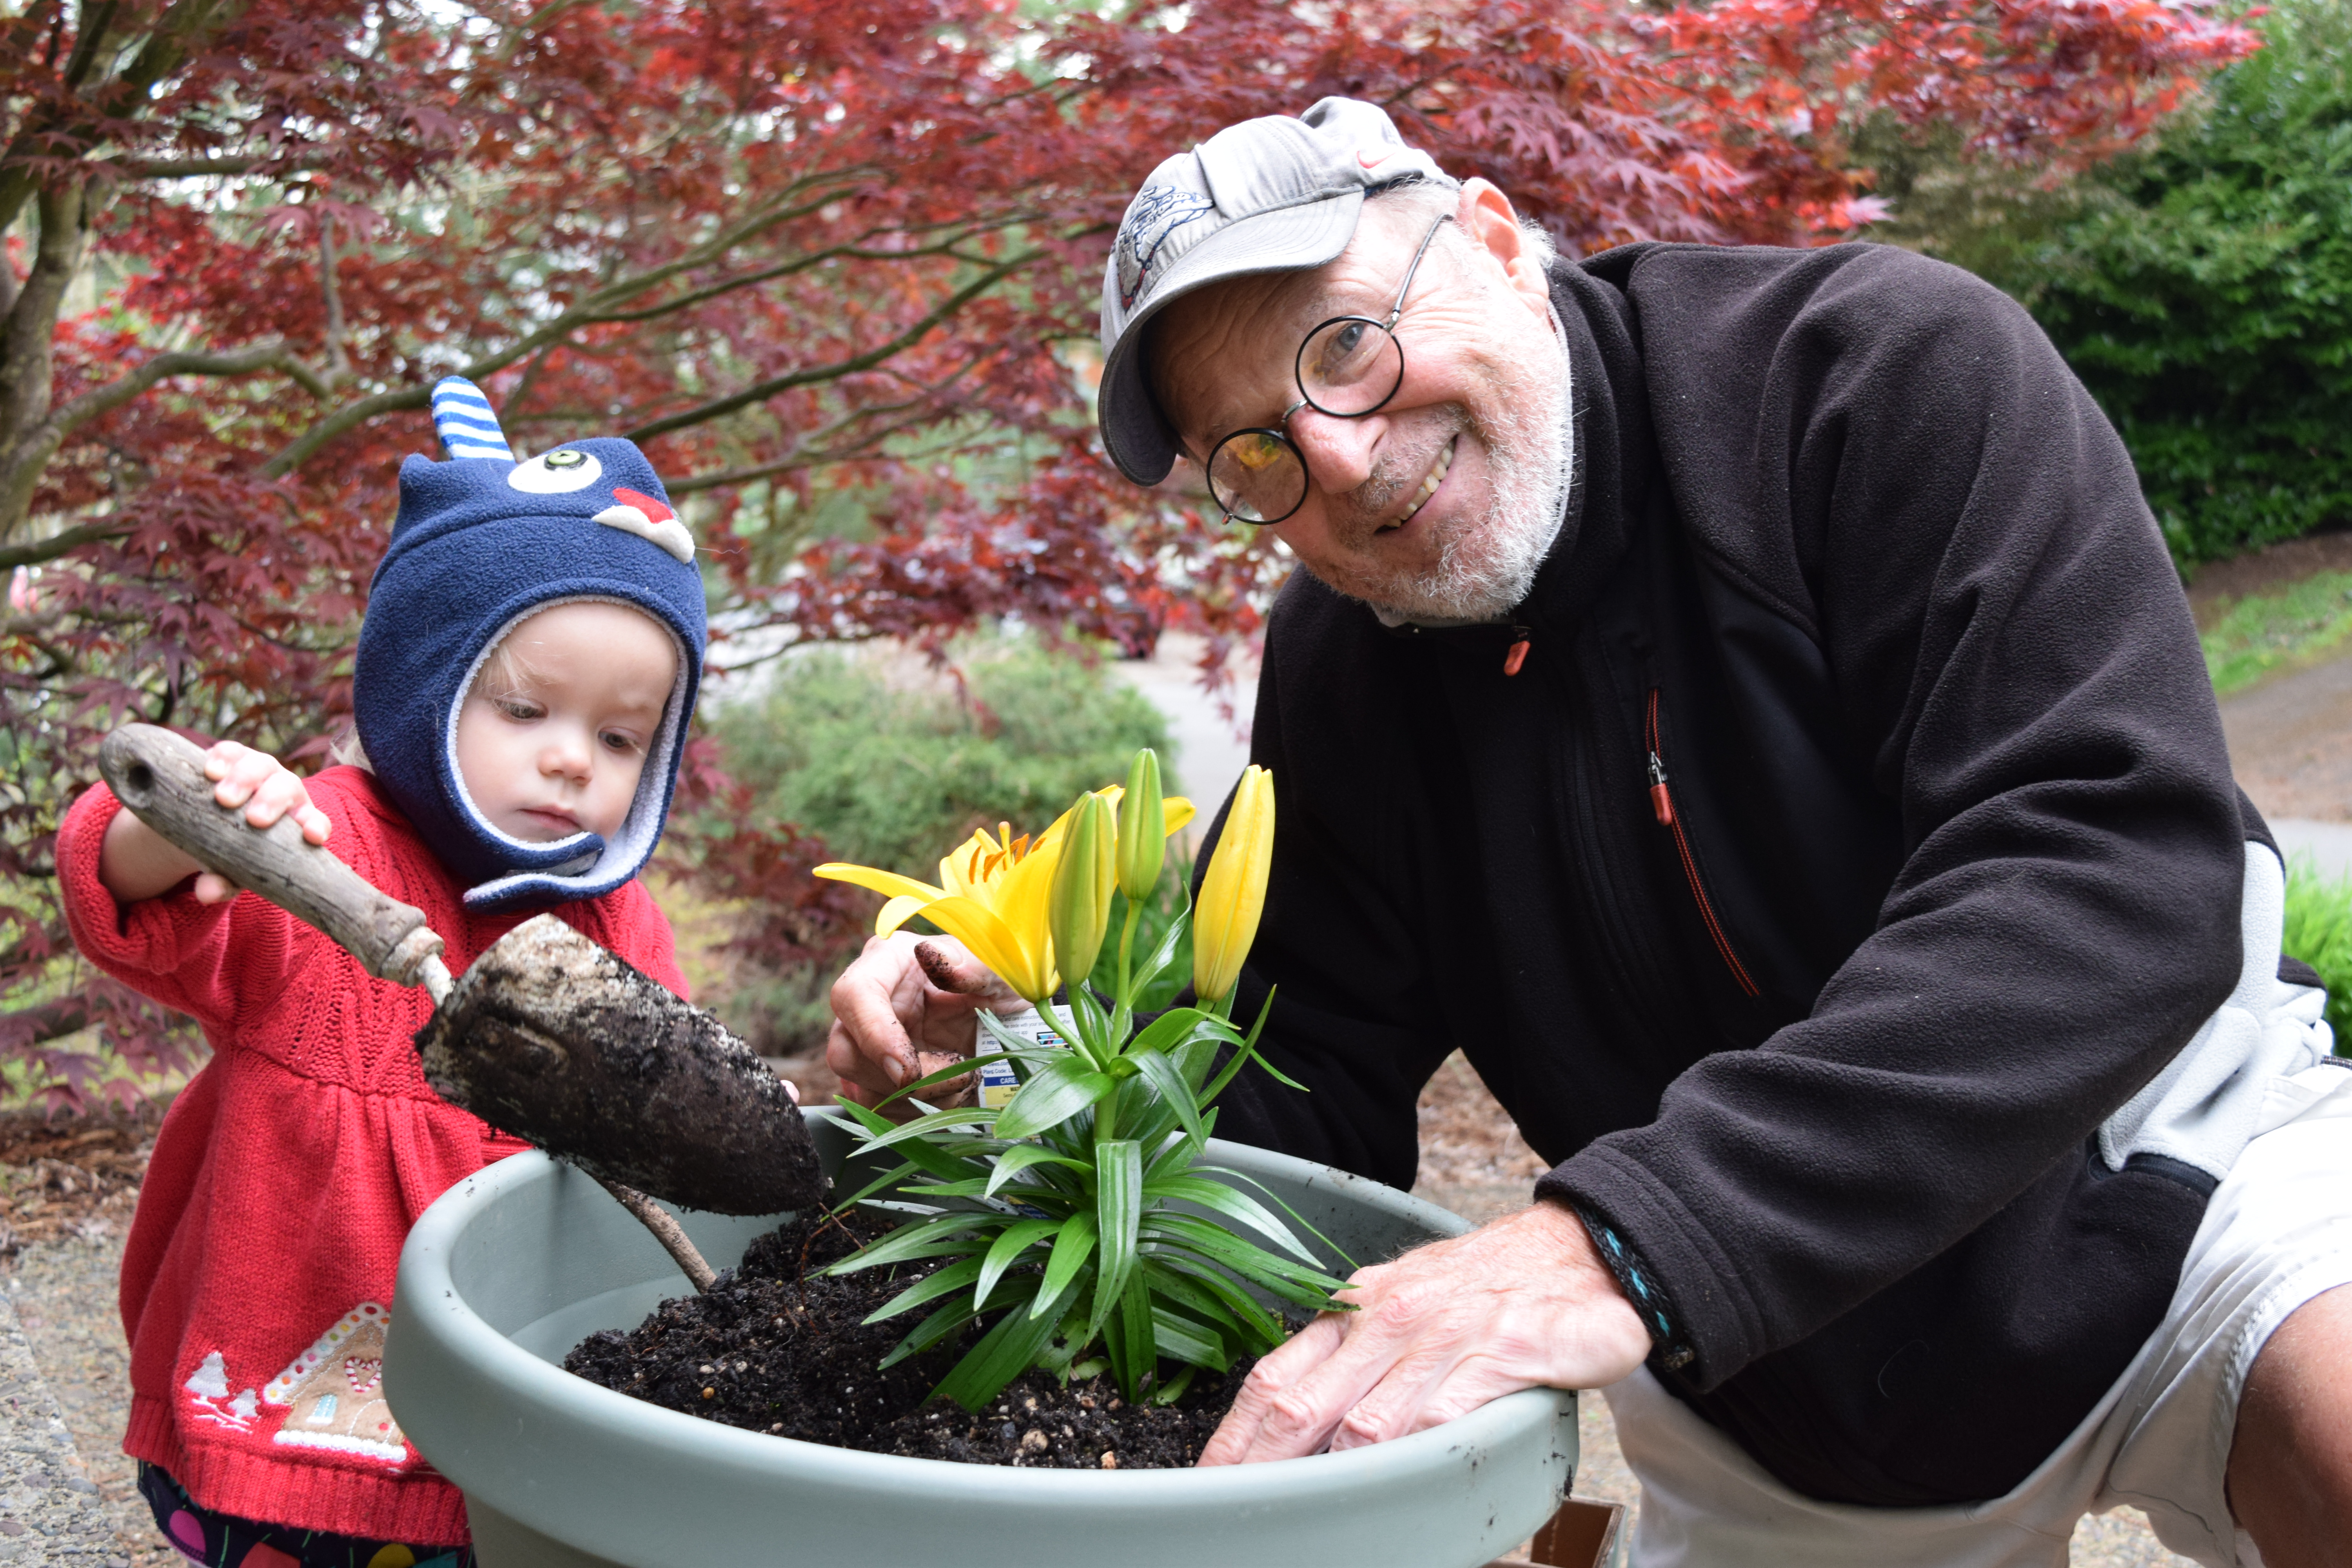 Toddler planting flowers with grandpa - Ten Thousand Hour mama